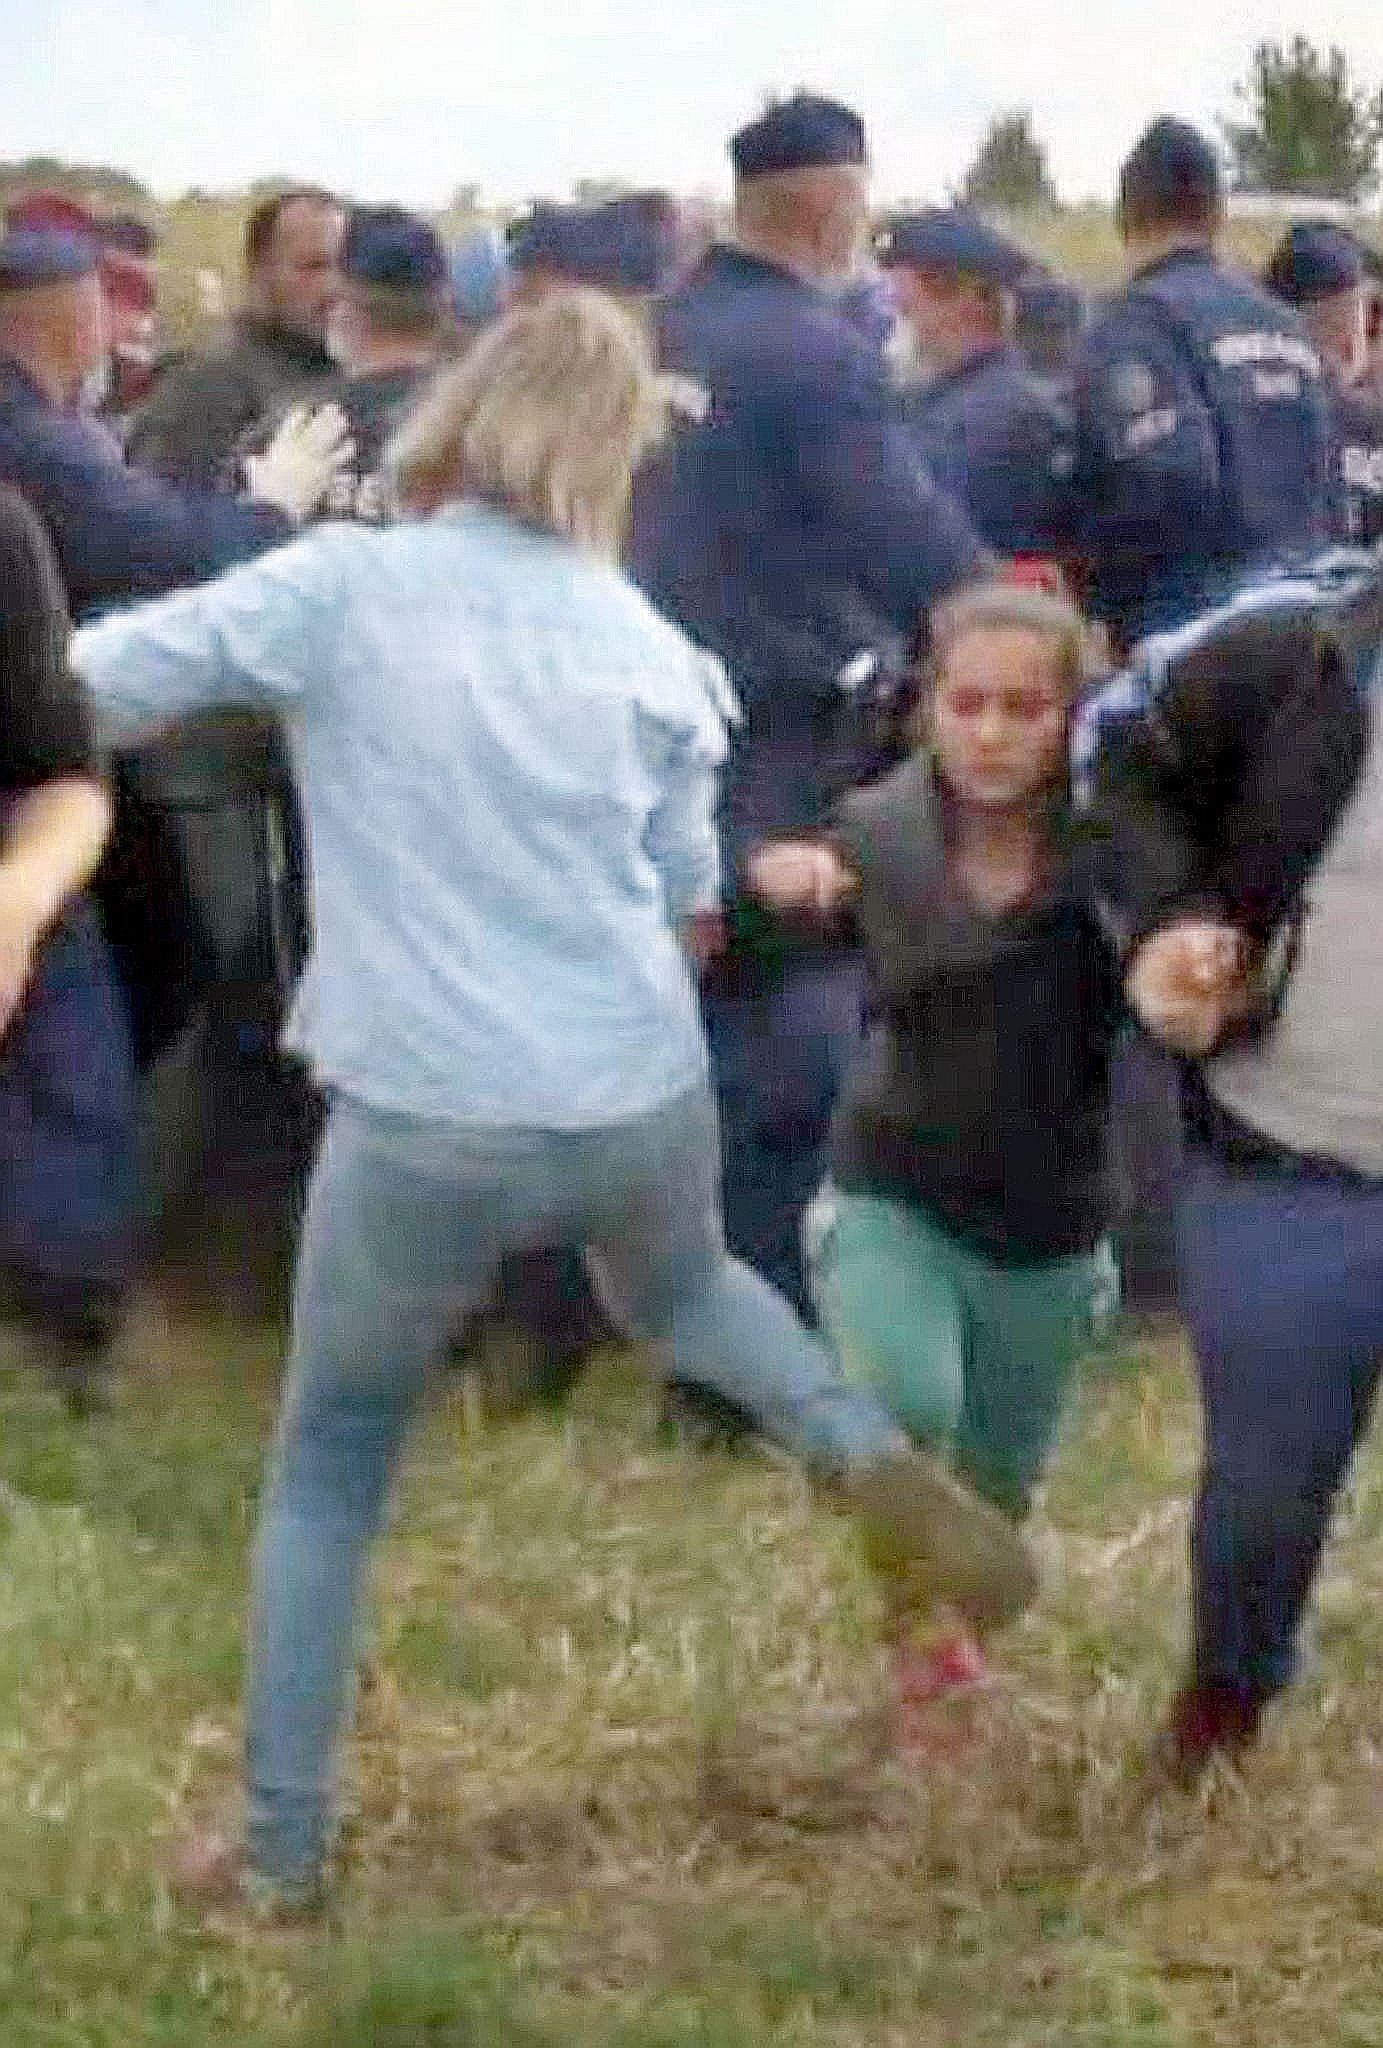 This video grab shows Hungarian TV camerawoman Petra Laszlo kicking a child as she runs with other migrants from a police line during disturbances at Roszke, southern Hungary. Ms Laszlo was fired after the footage went viral.